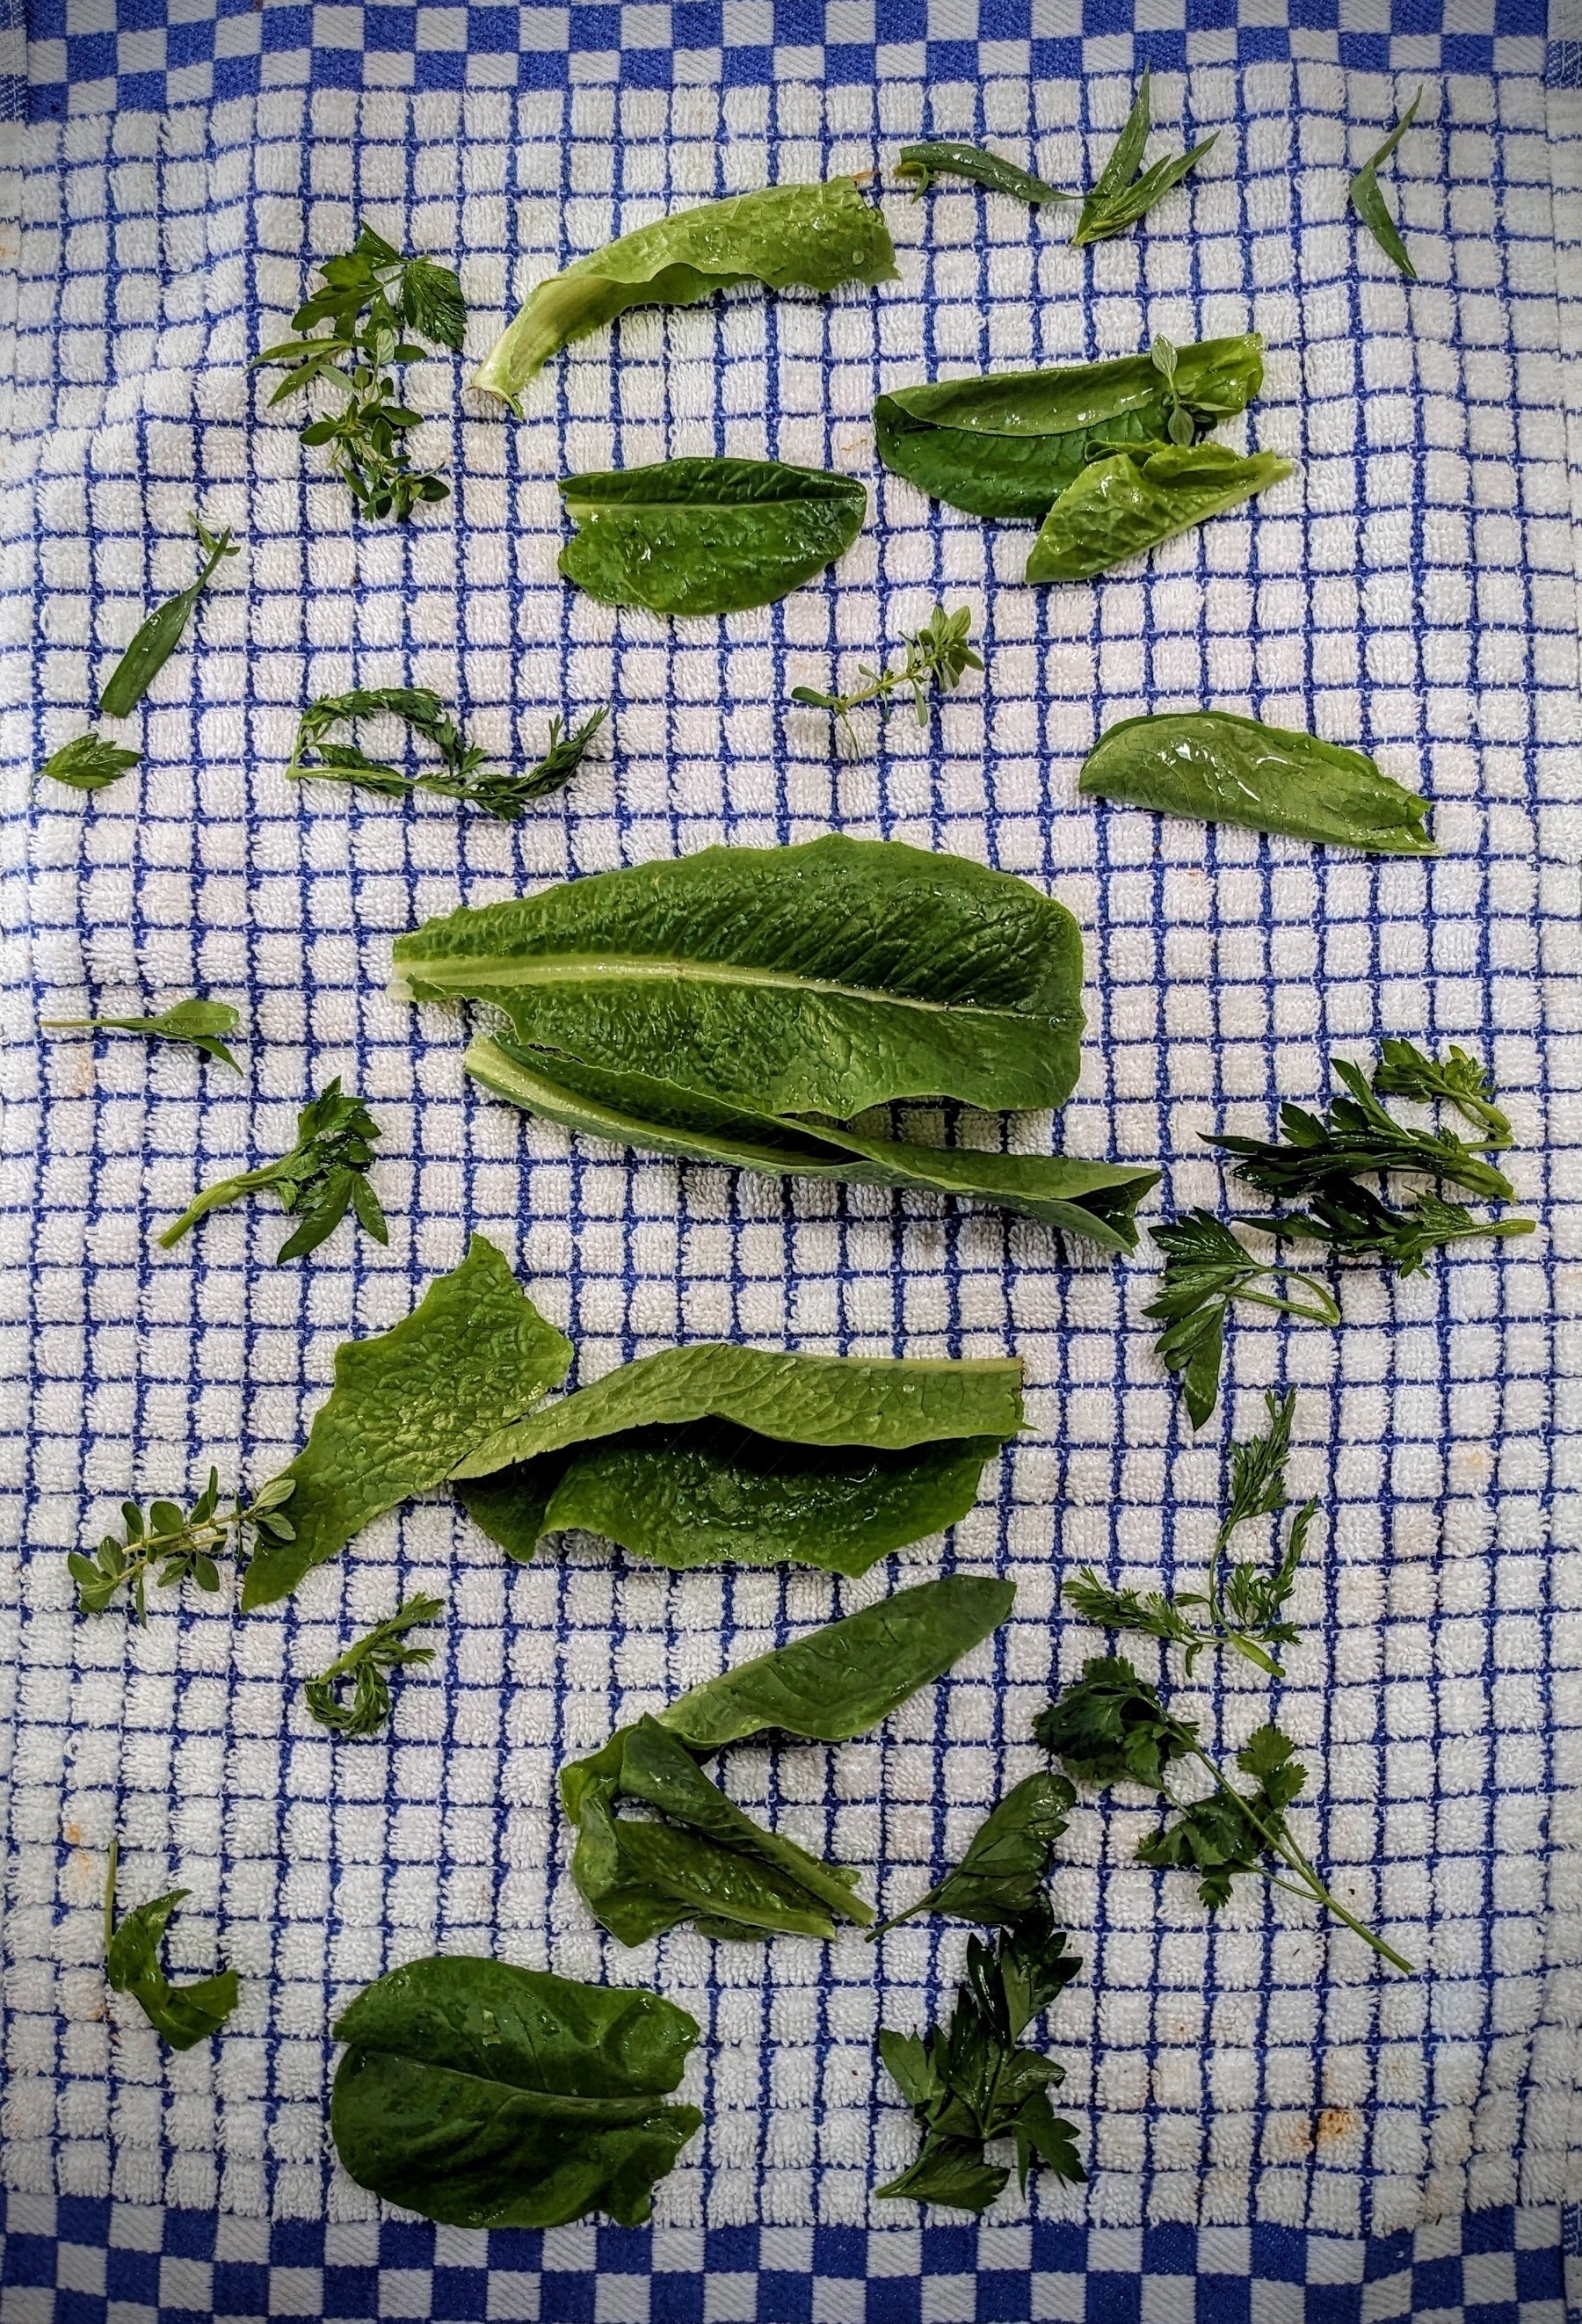 Salad greens laid out on a blue-and-white-checked towel.